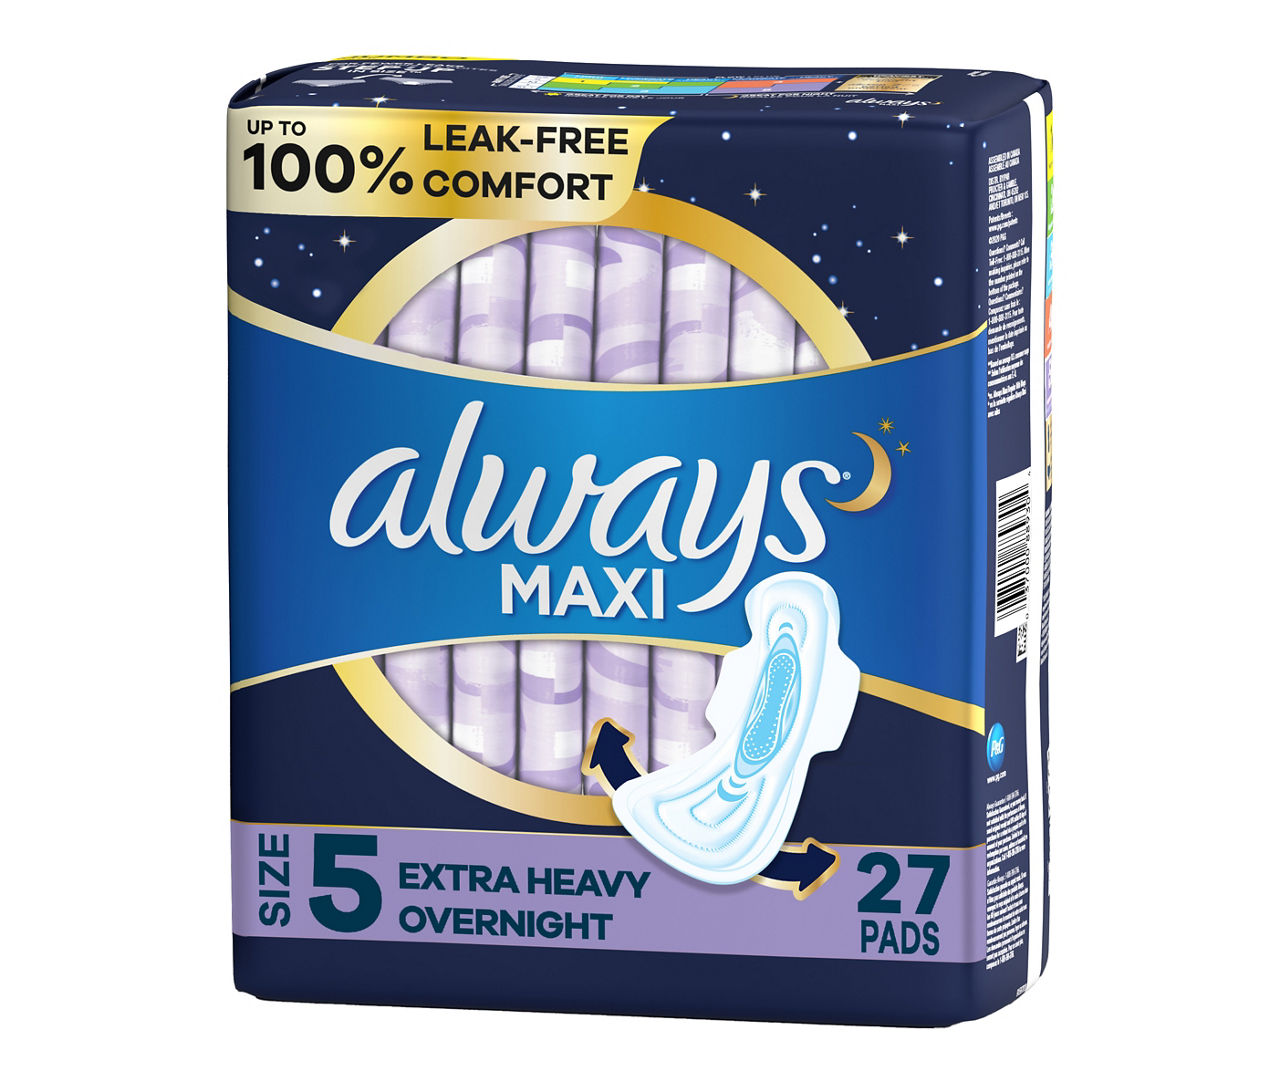 ALWAYS Ultra Thin Size 4 Overnight Pads with Wings Scented, 24